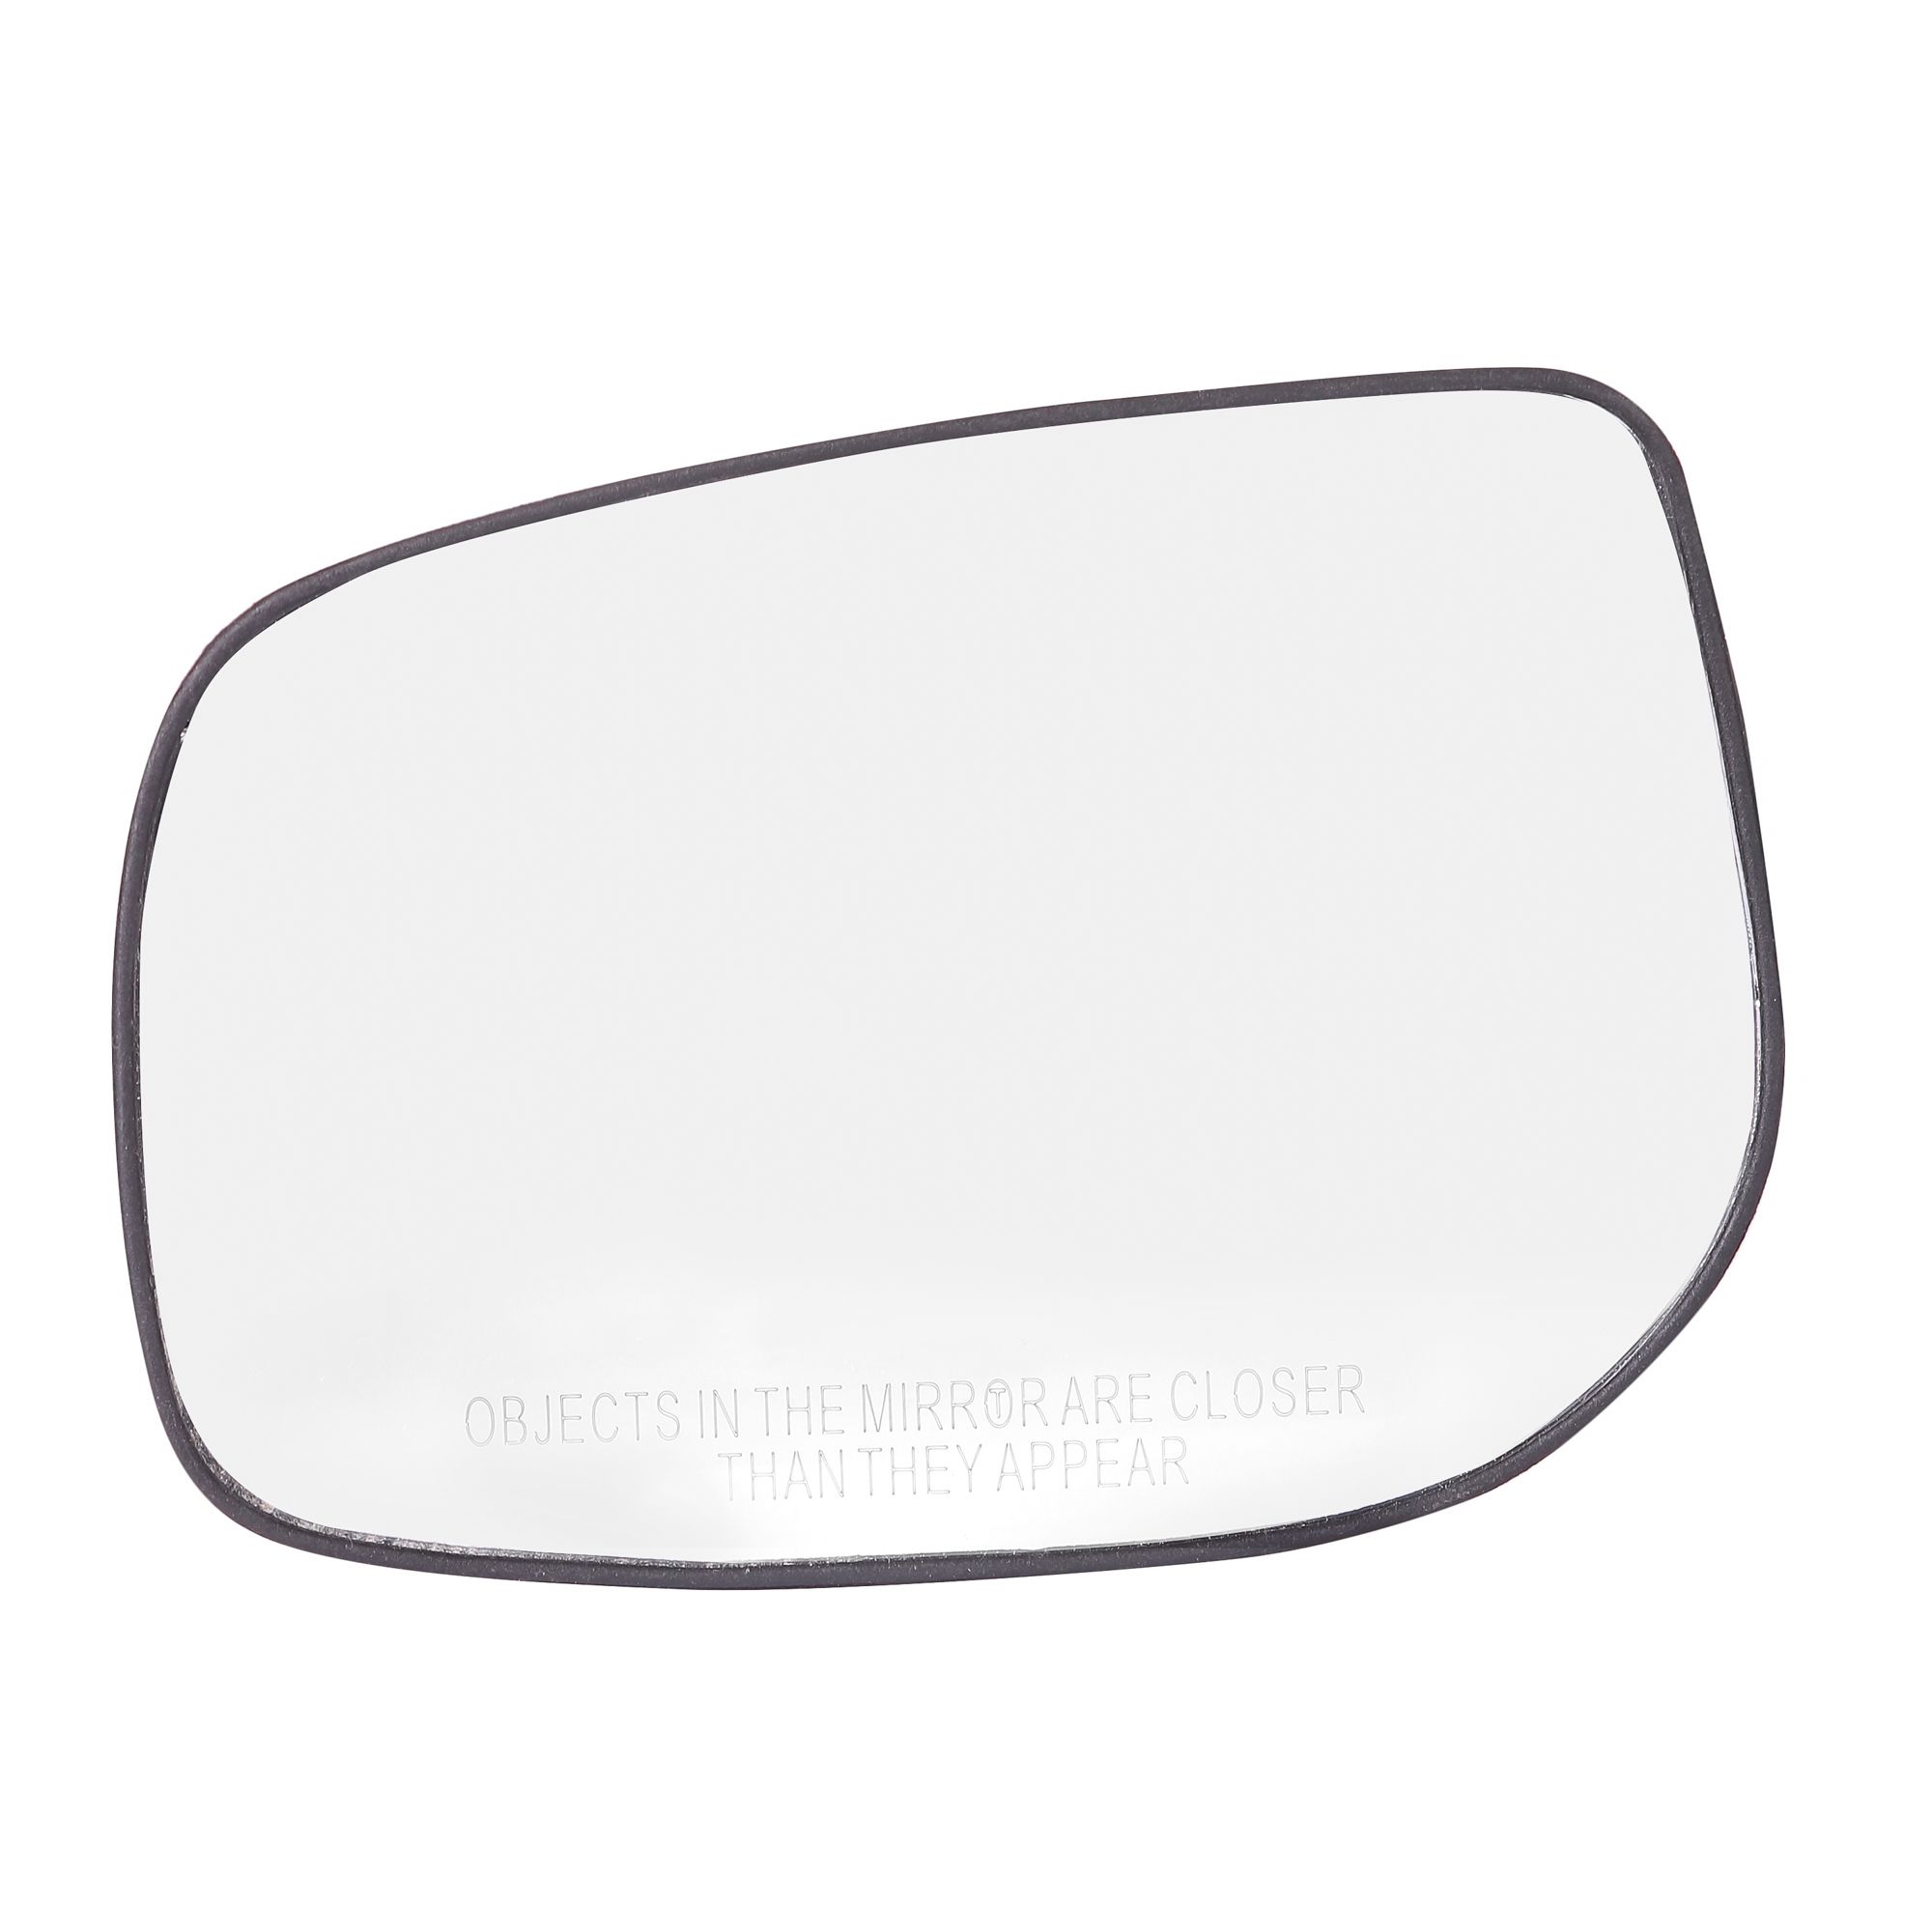 RMC Car Side Mirror Glass Plate (Sub Mirror Plate) suitable for Toyota Etios.